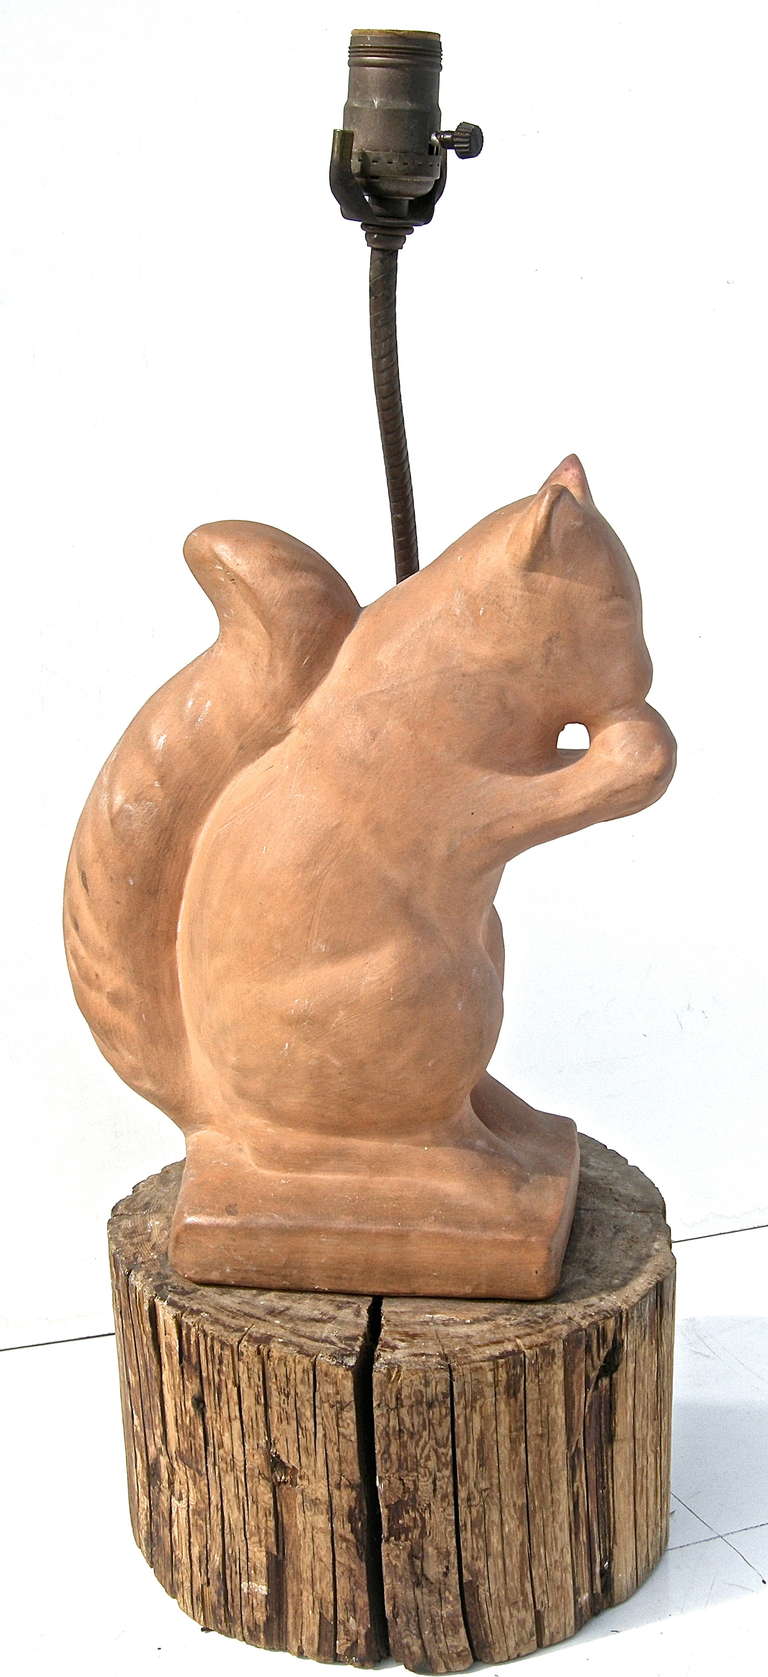 Delightful vintage, Adirondack origins, table light, with a whimsical Mr. Squirrel motif. Of hand made terra cotta, this handsome guy is busy with his favorite nut. Resting on a piece of hand-cut hard wood. Height below to top of socket.